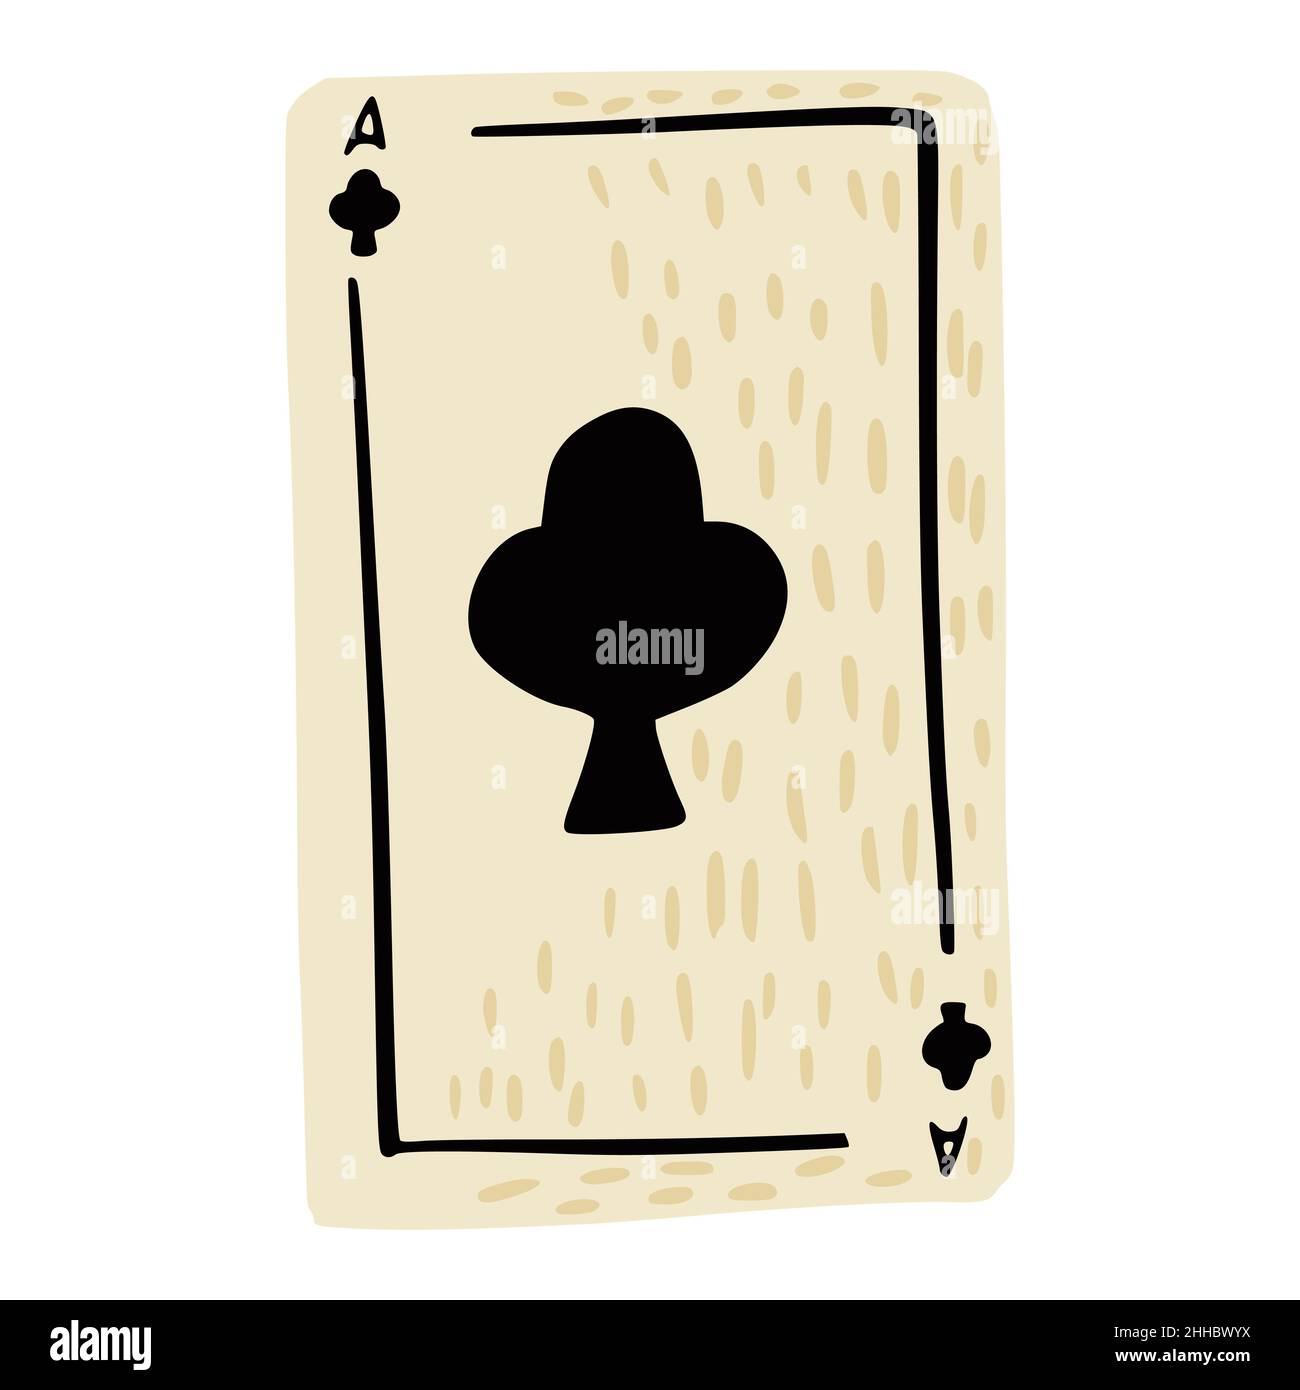 Playing cards Vectors & Illustrations for Free Download